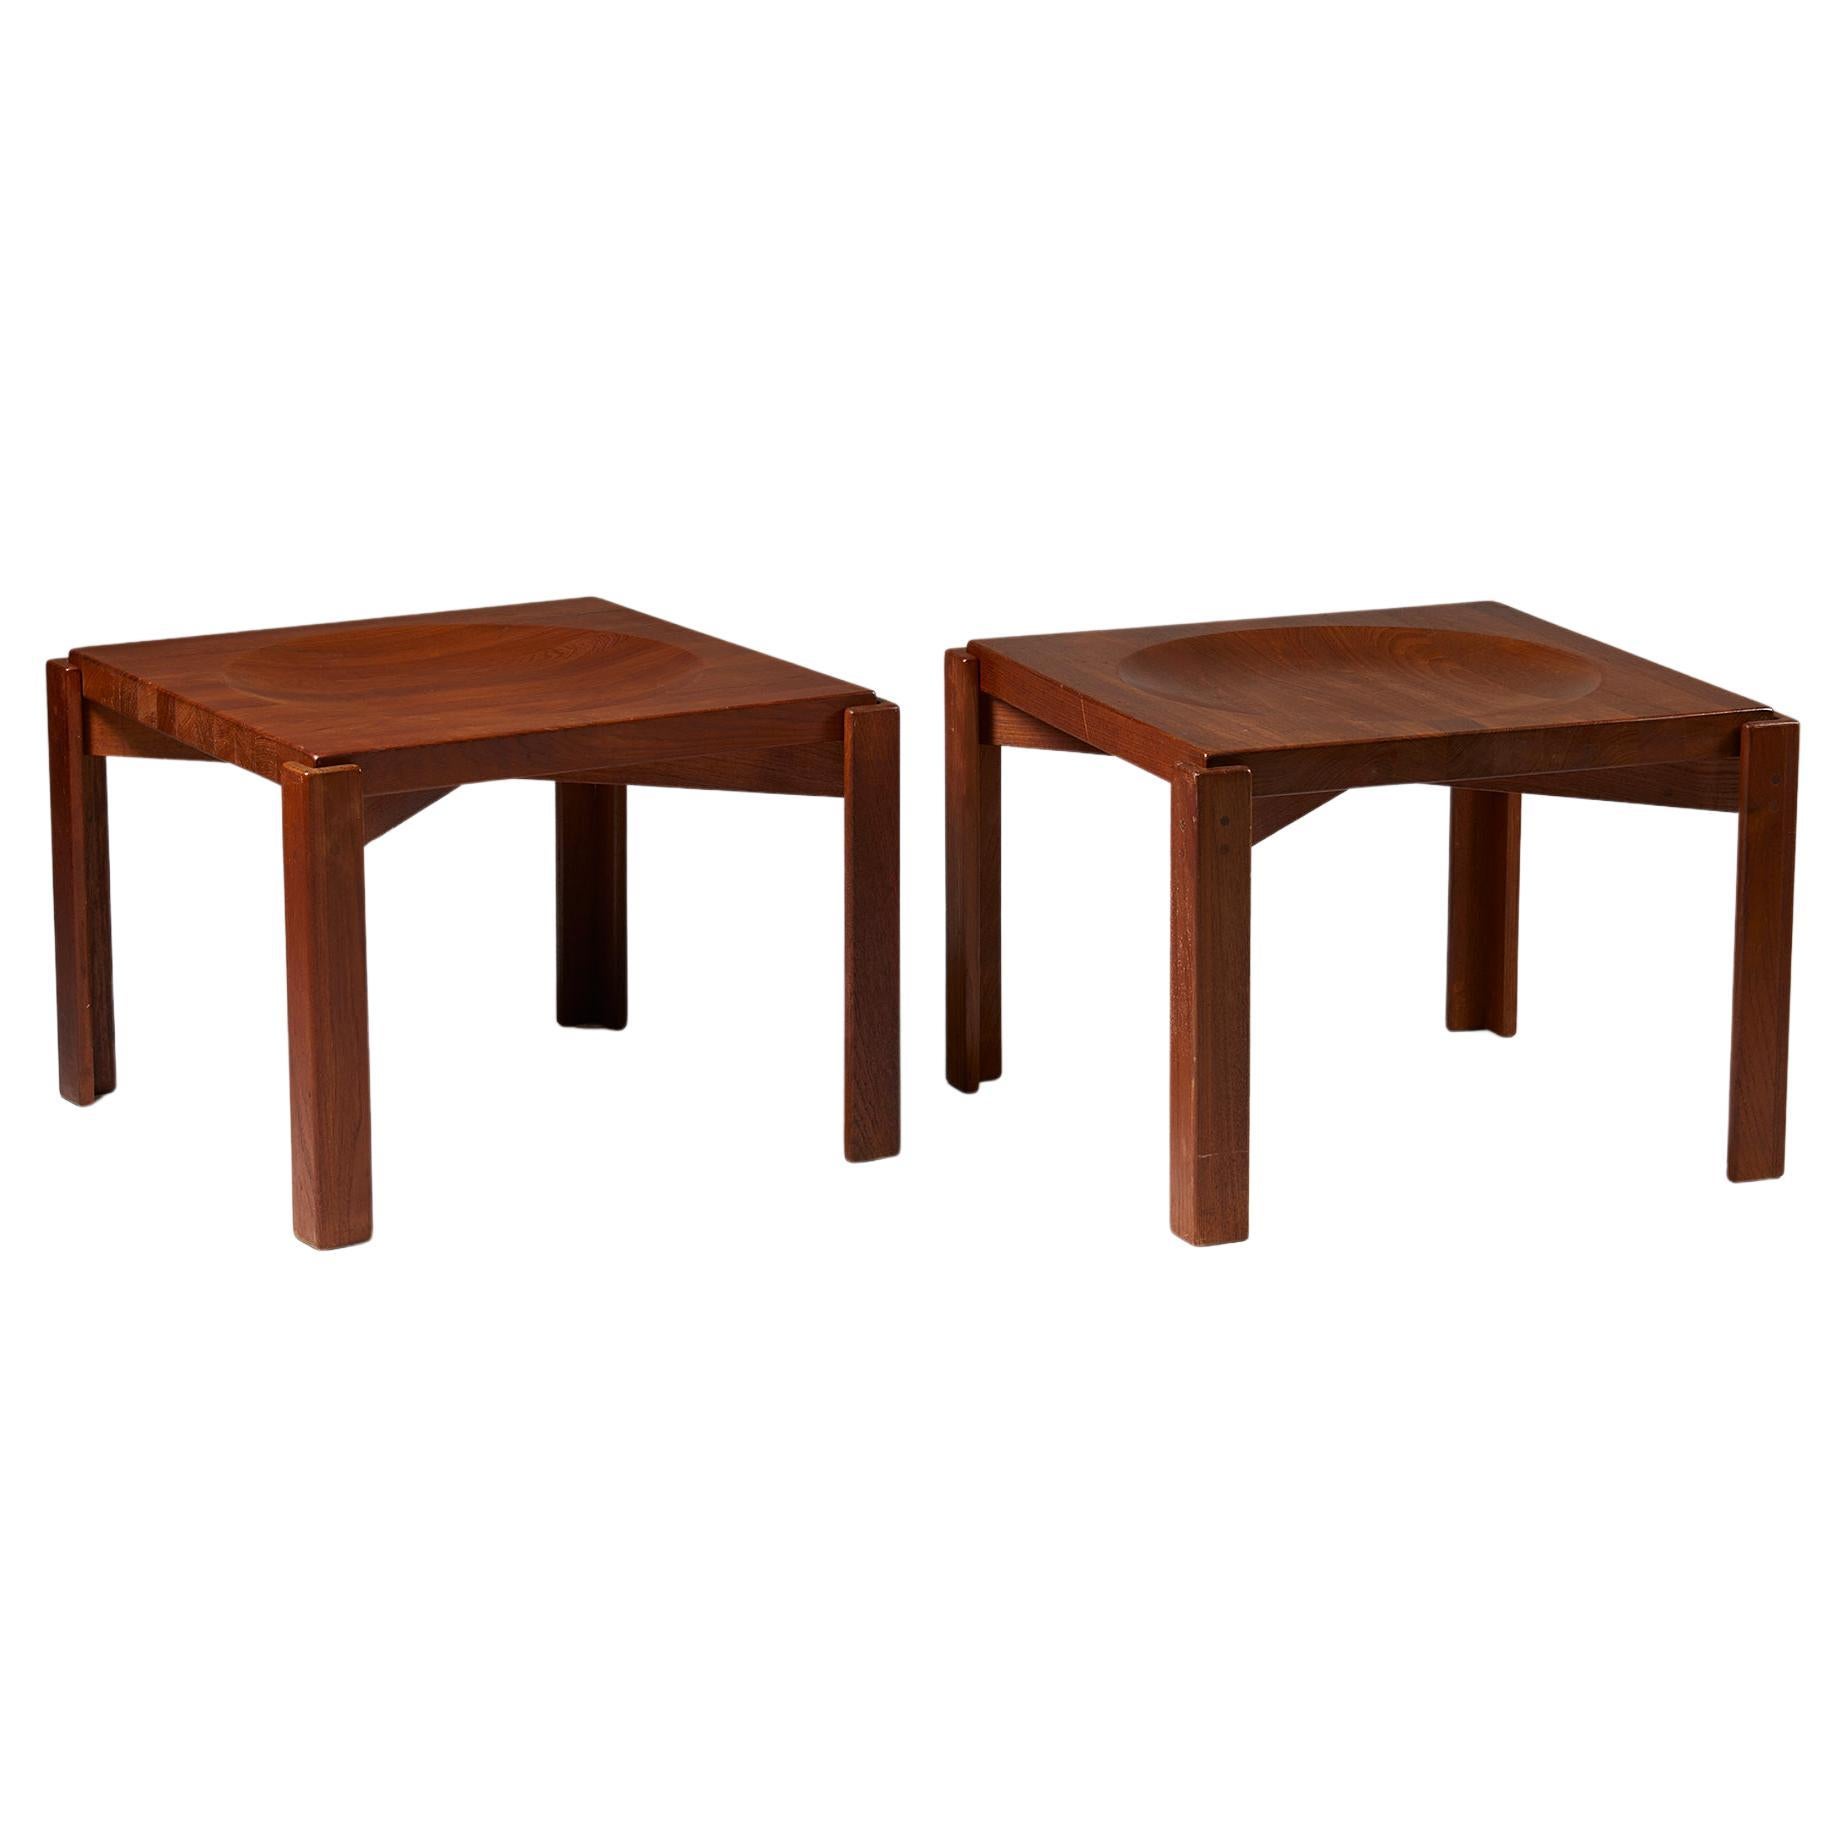 Pair of Tray Tables Designed by Jens Quistgaard